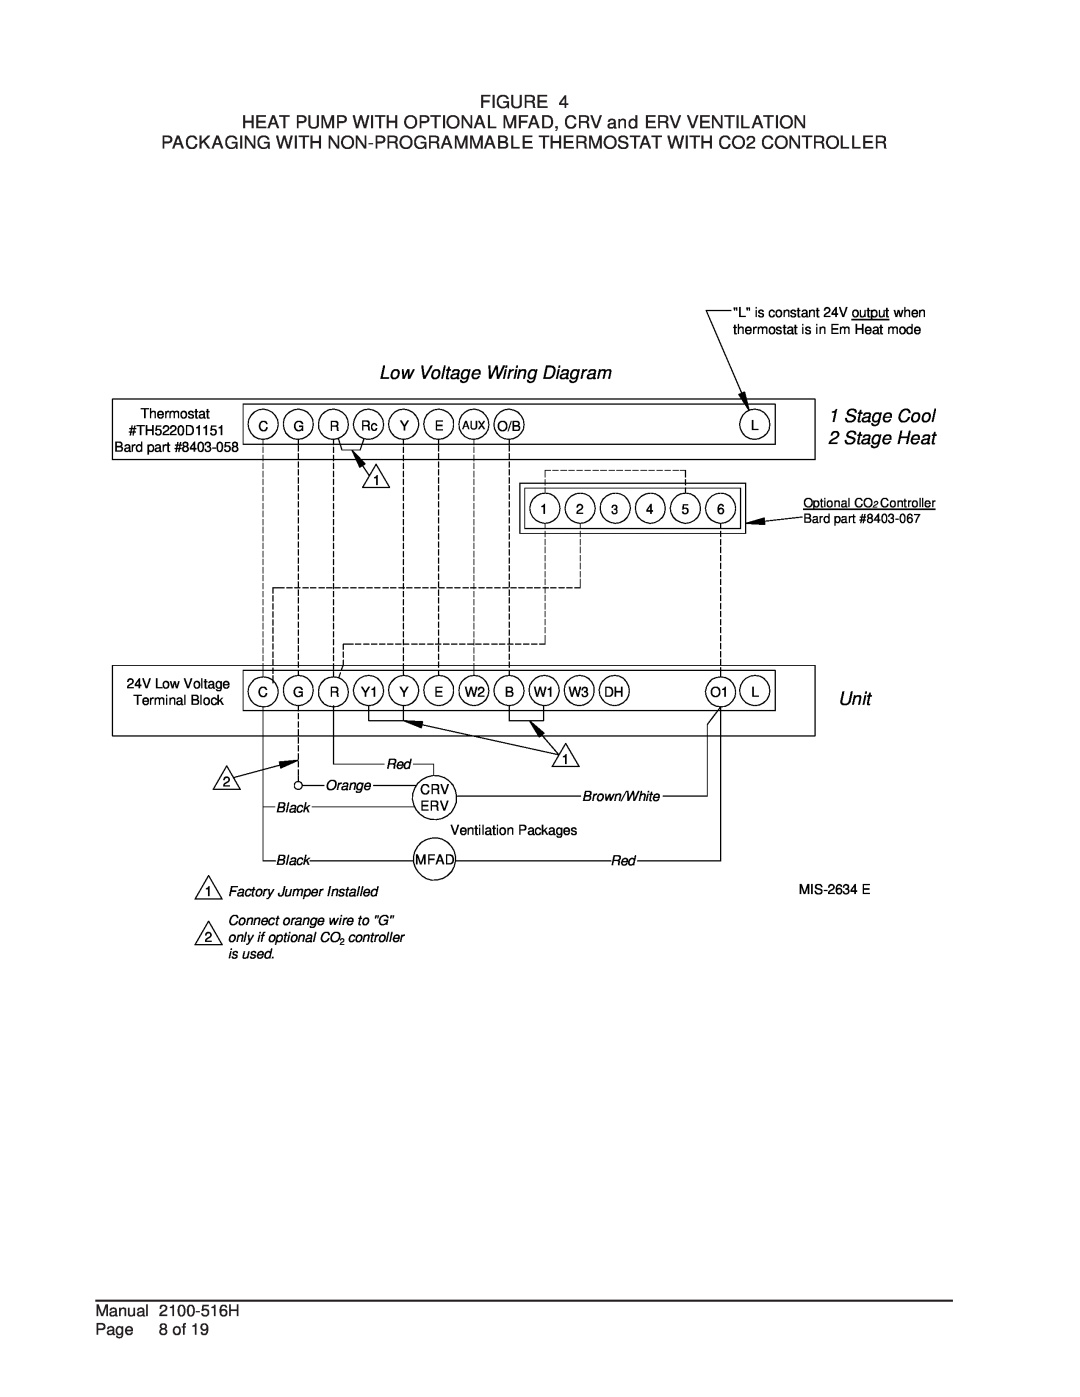 Bard S**H*D, W**H*D, T**H*D installation instructions Low Voltage Wiring Diagram, Unit, Stage Cool, Stage Heat 